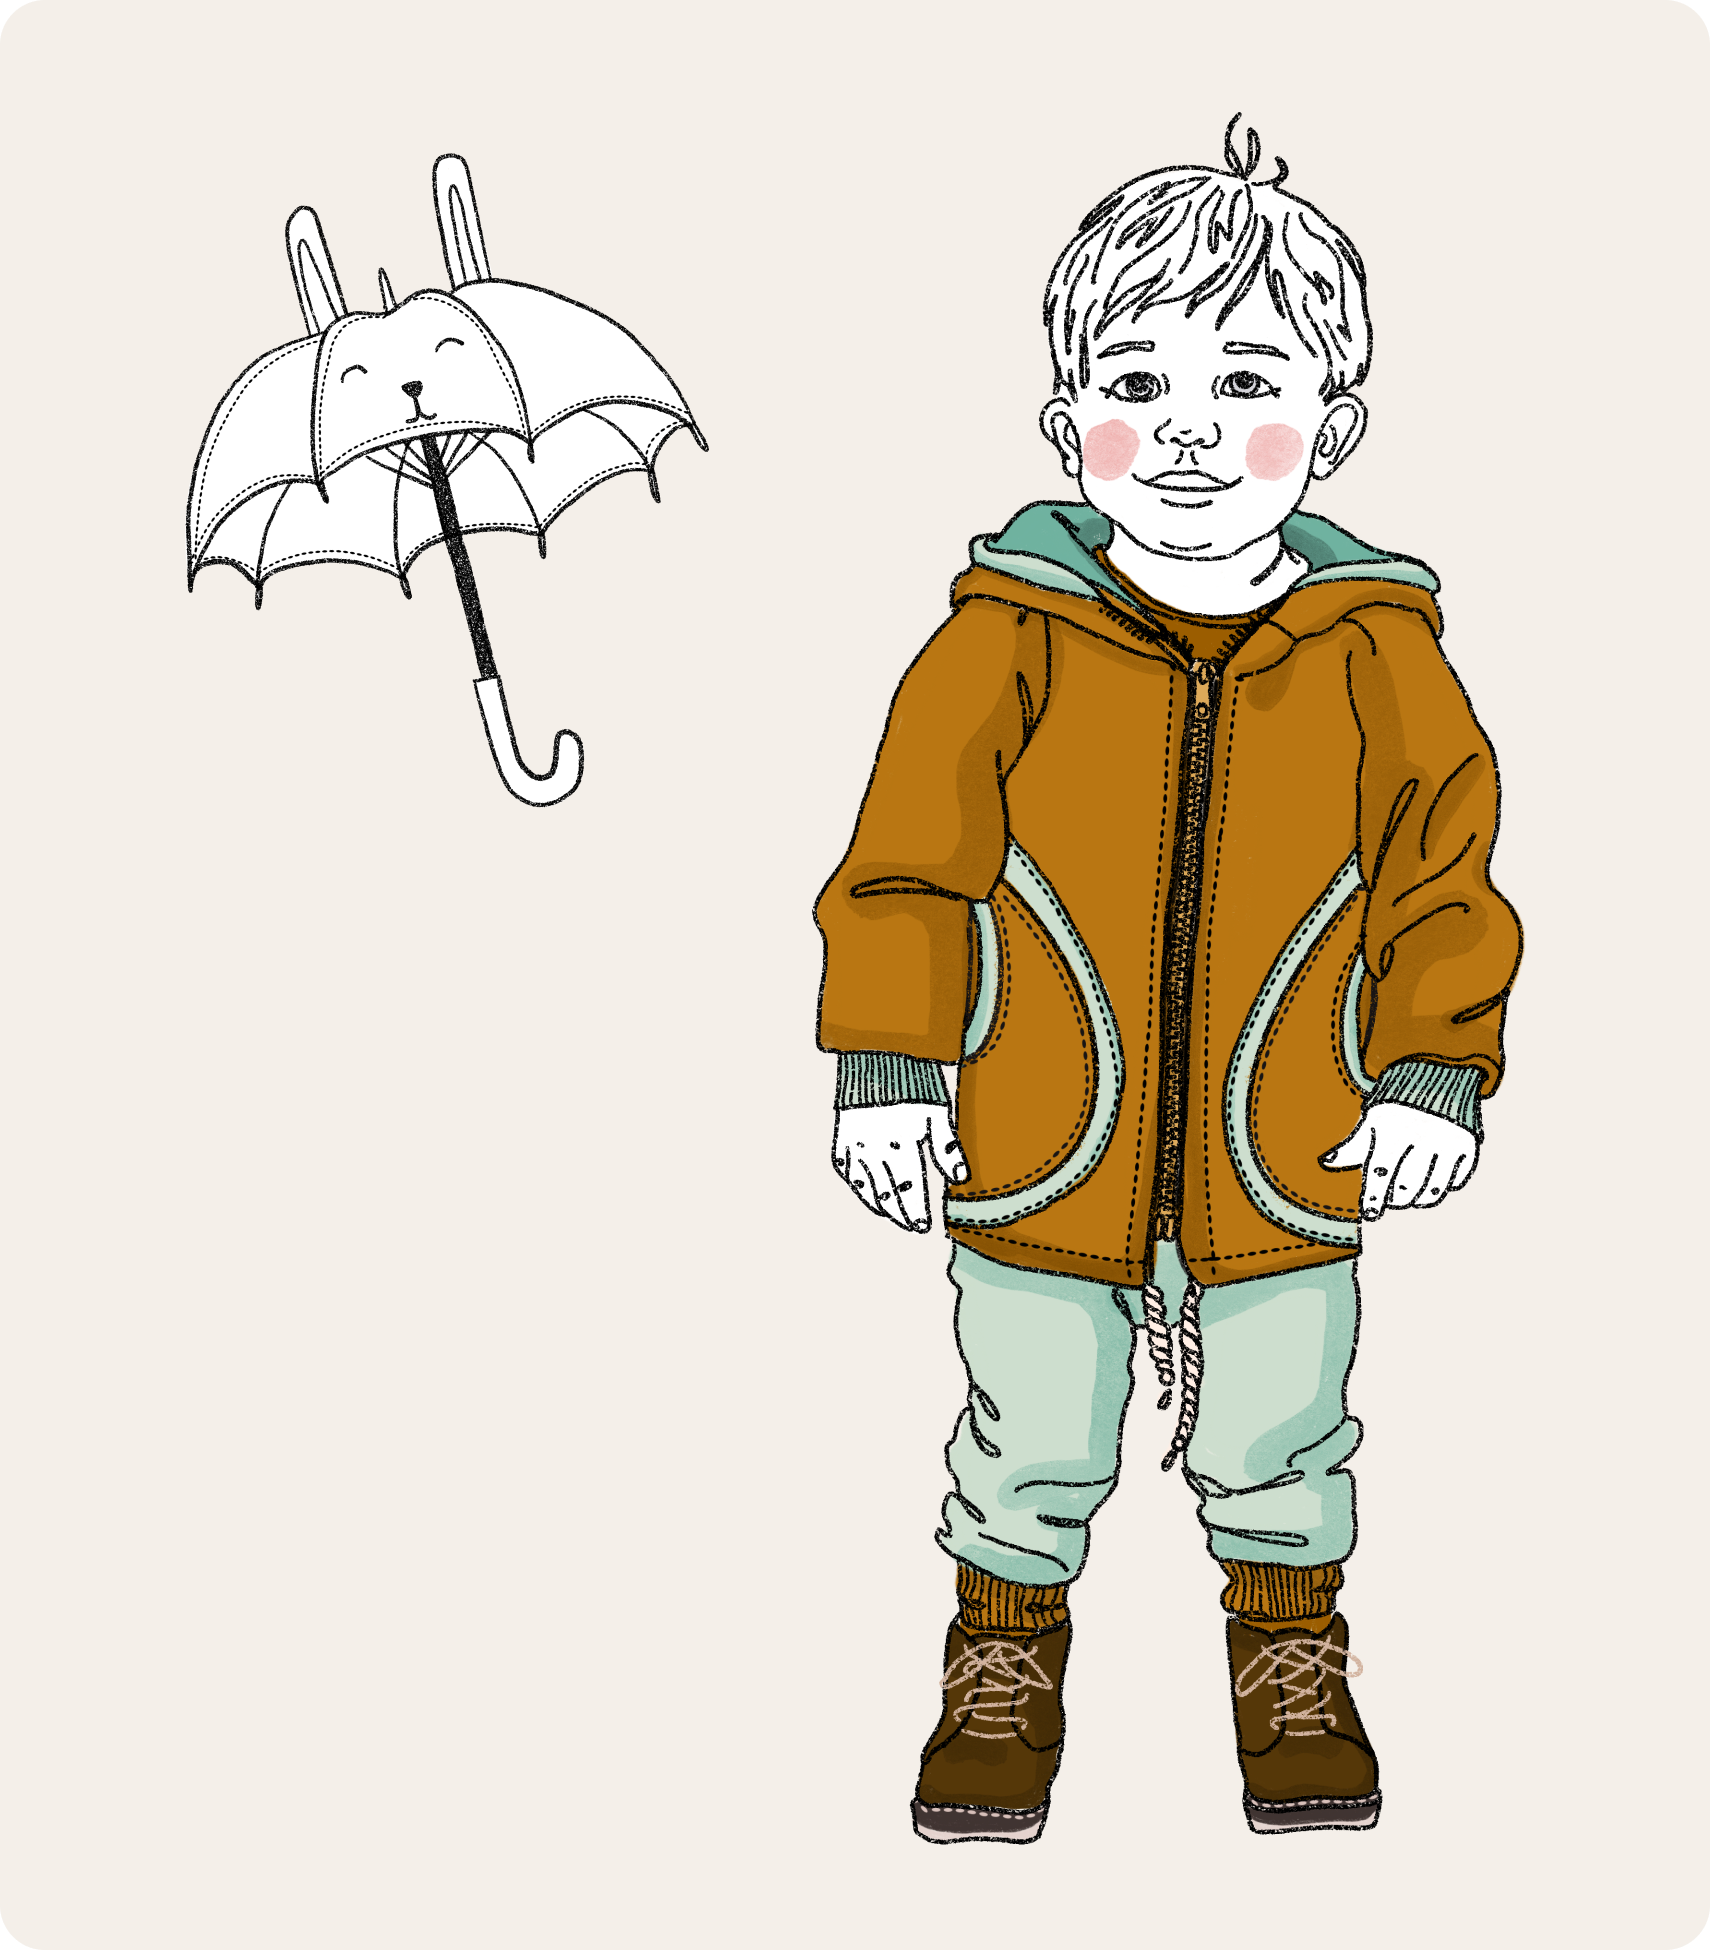 Illustration of a boy with a floating umbrella.